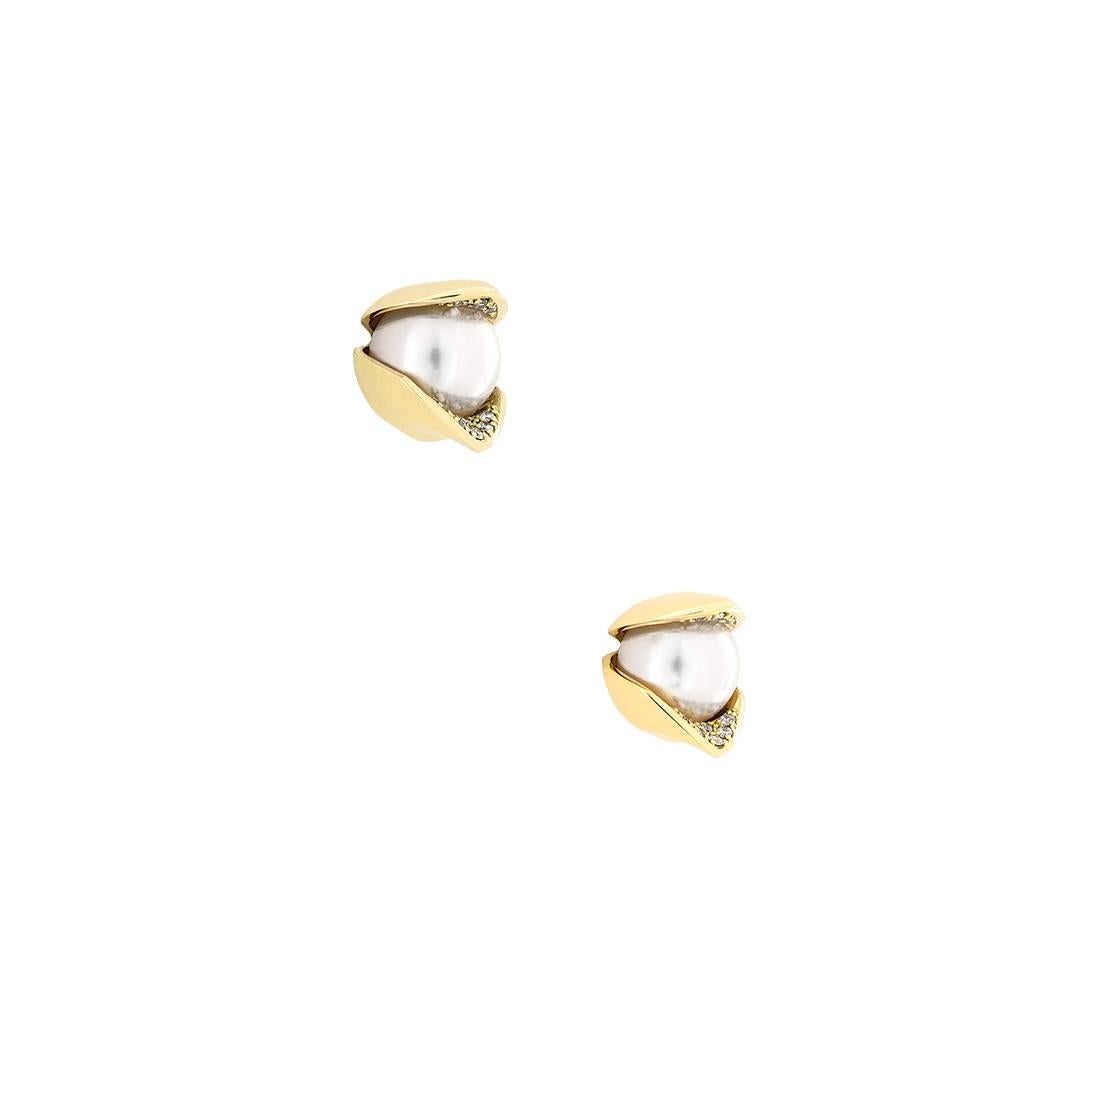 Delicate as their namesake, the Orchid-inspired Diamond Studs boast fine detailing of 0.04 tct pavé-set diamonds on the interior of the petals. A pair of 8mm Akoya cultured pearls are set in 18k Fairtrade gold.
